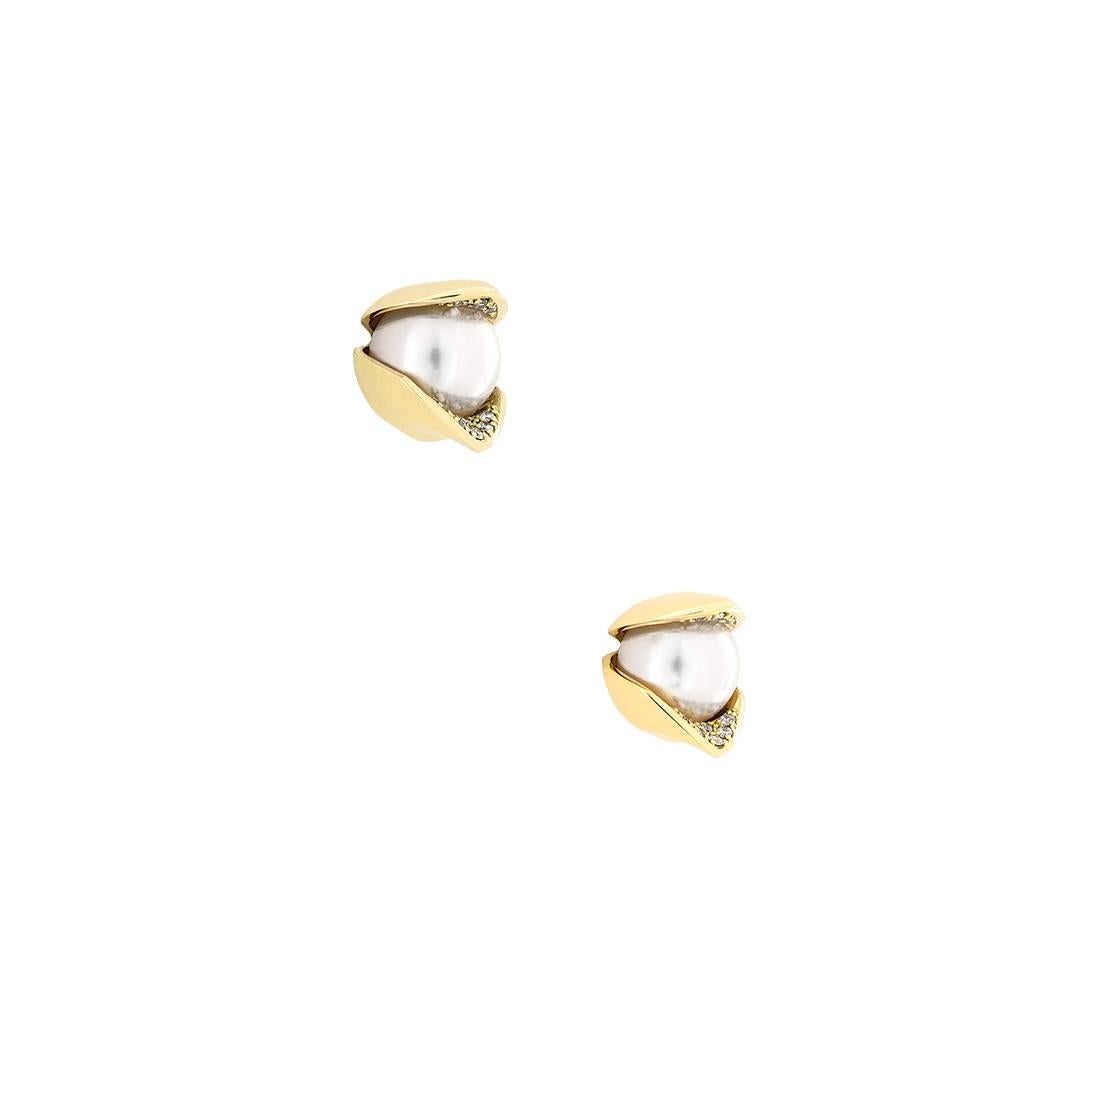 Delicate as their namesake, the Orchid-inspired Diamond Studs boast fine detailing of 0.04 tct pavé-set diamonds on the interior of the petals. A pair of 8mm Akoya cultured pearls are set in 18k Fairtrade gold.
